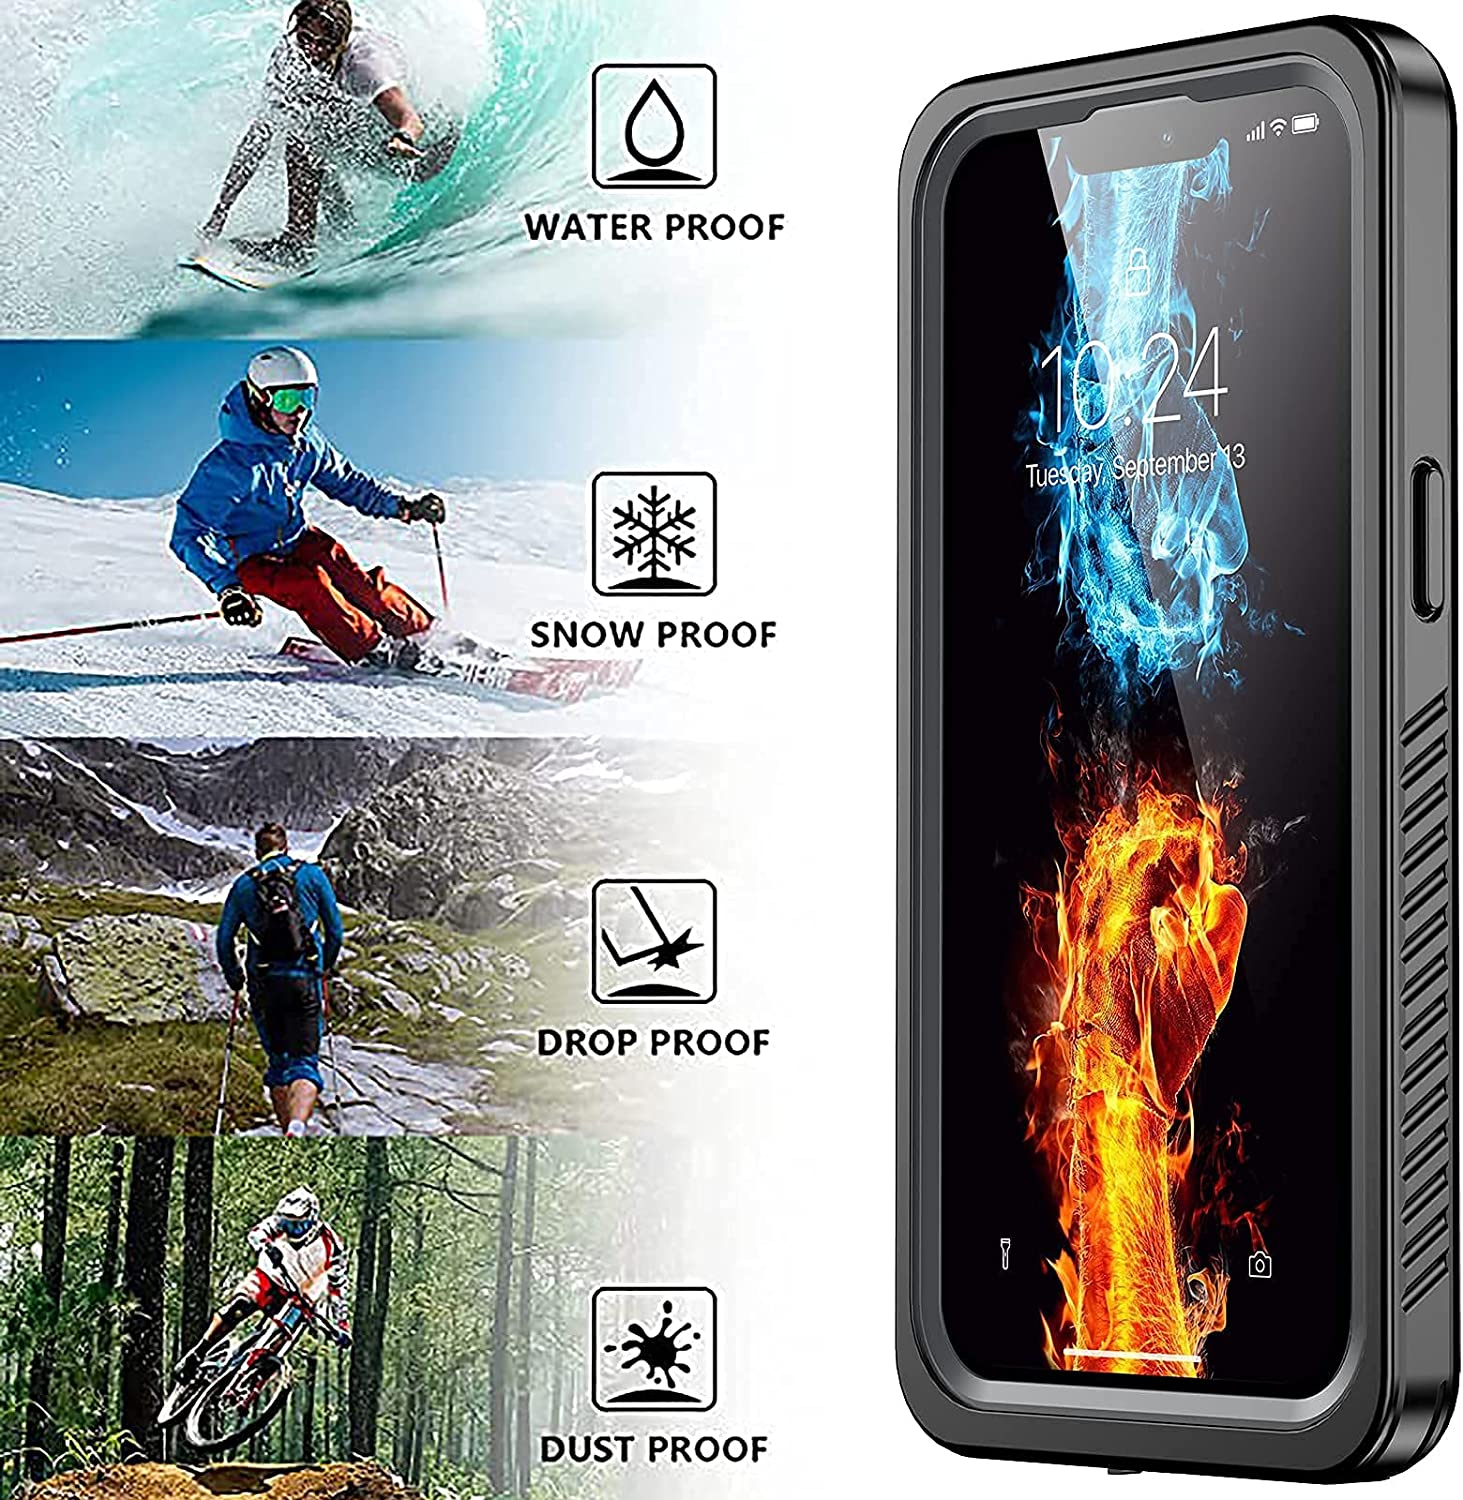 Waterproof Built-in Screen Protector Full Body Dustproof Underwater Rugged Case for iPhone 13 Pro Max Cover